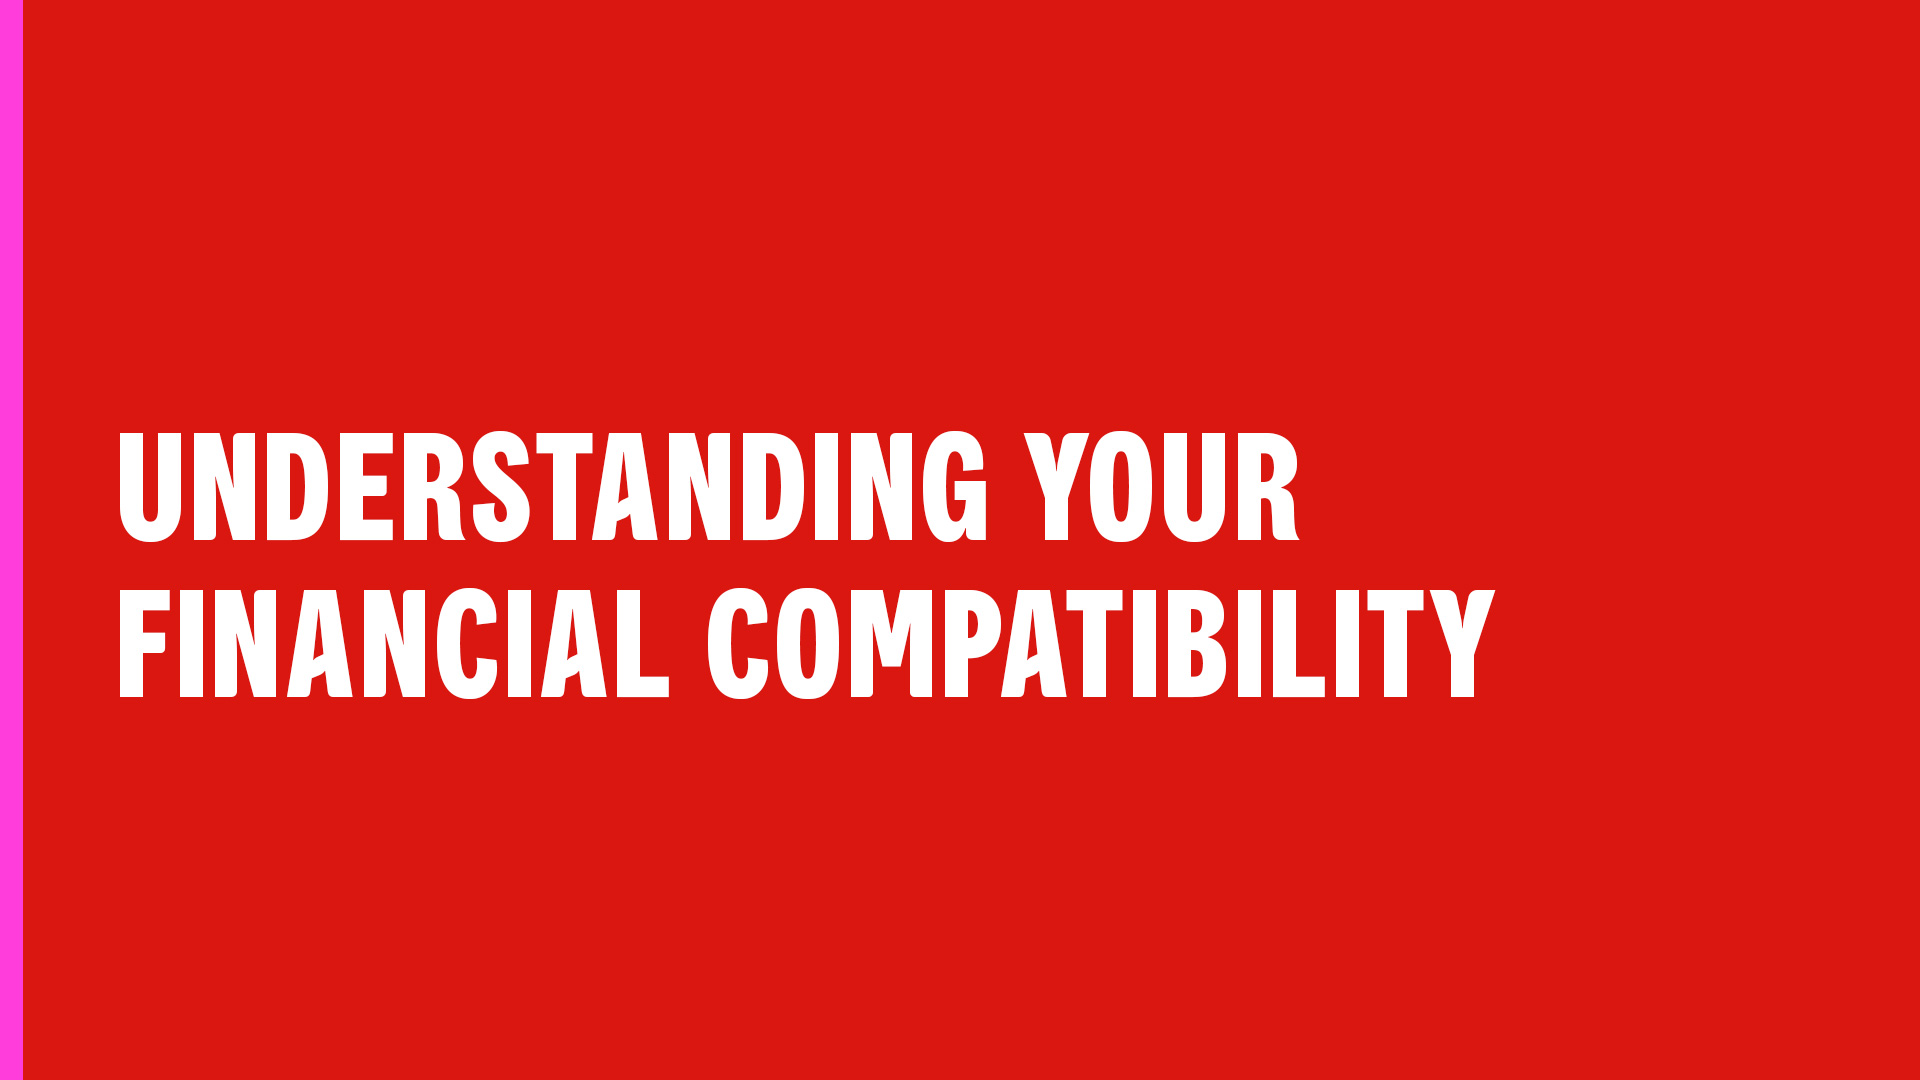 Understanding your financial compatibility.